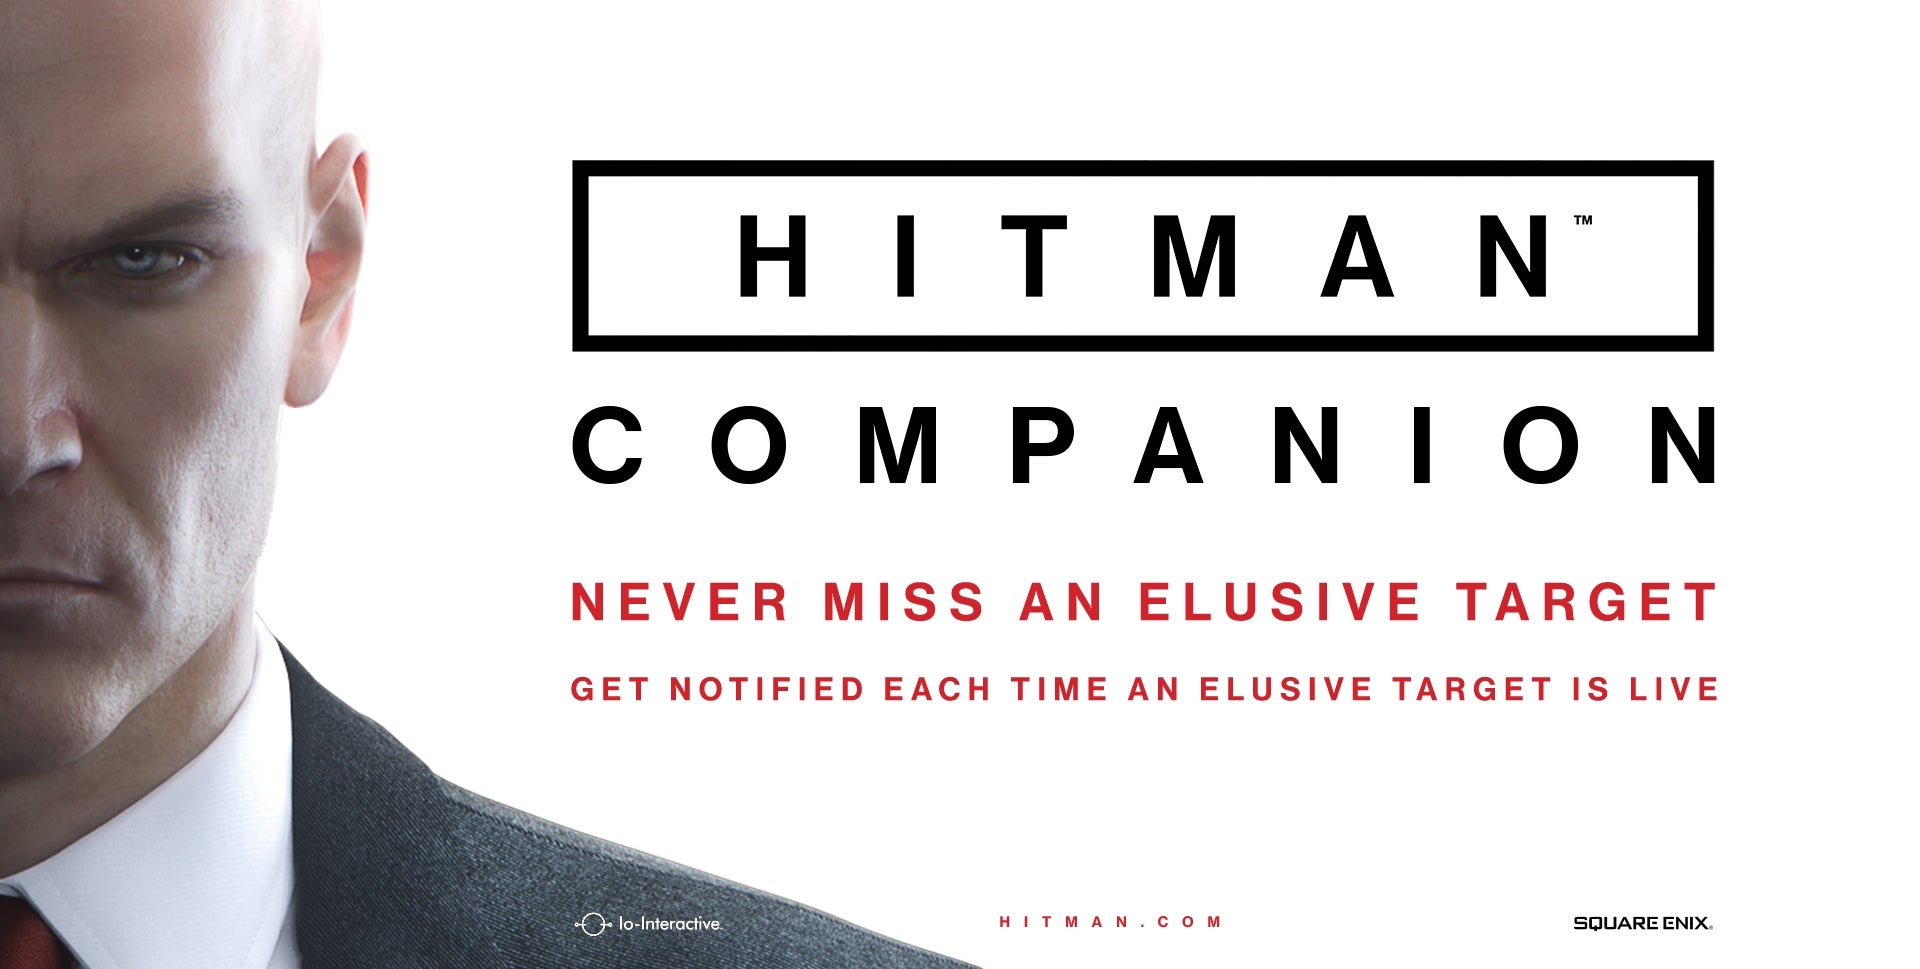 New Hitman Companion app for Android and iOS will tell gamers all about their next assassination target in advance